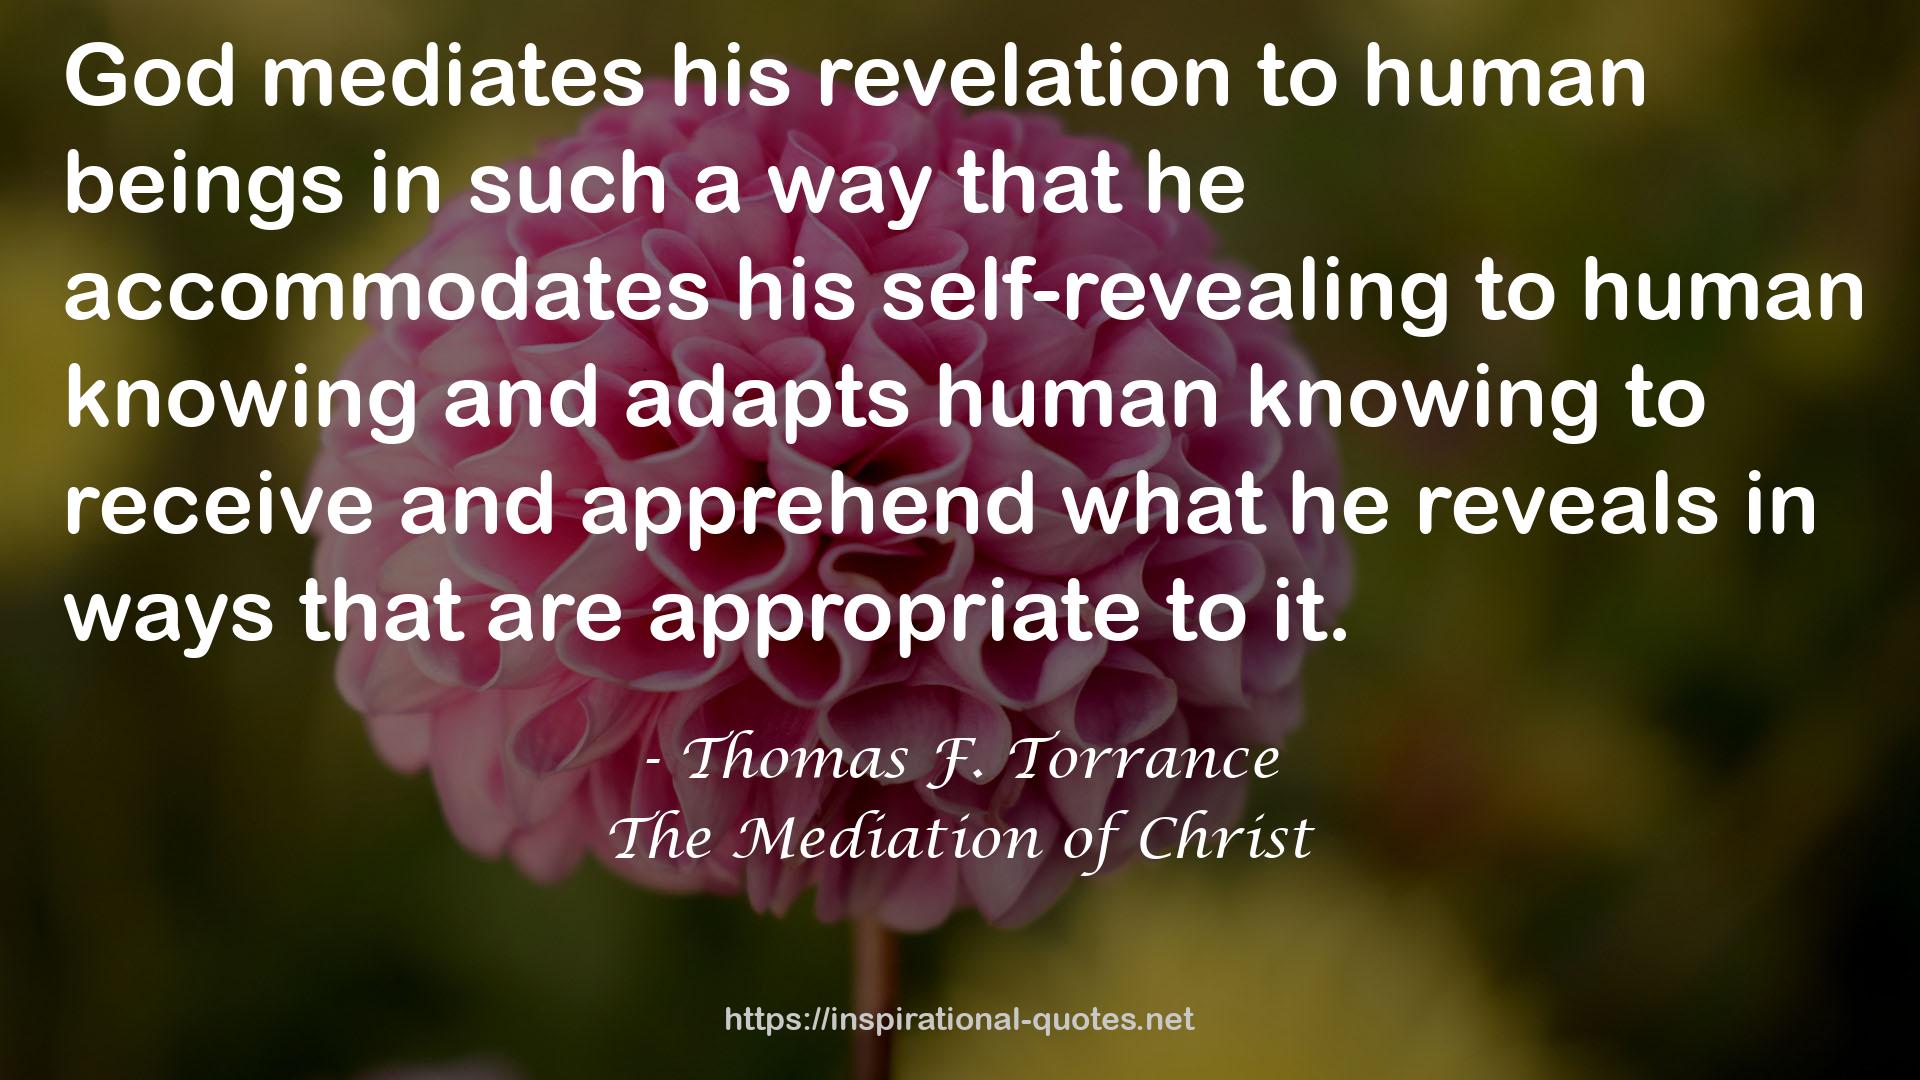 The Mediation of Christ QUOTES